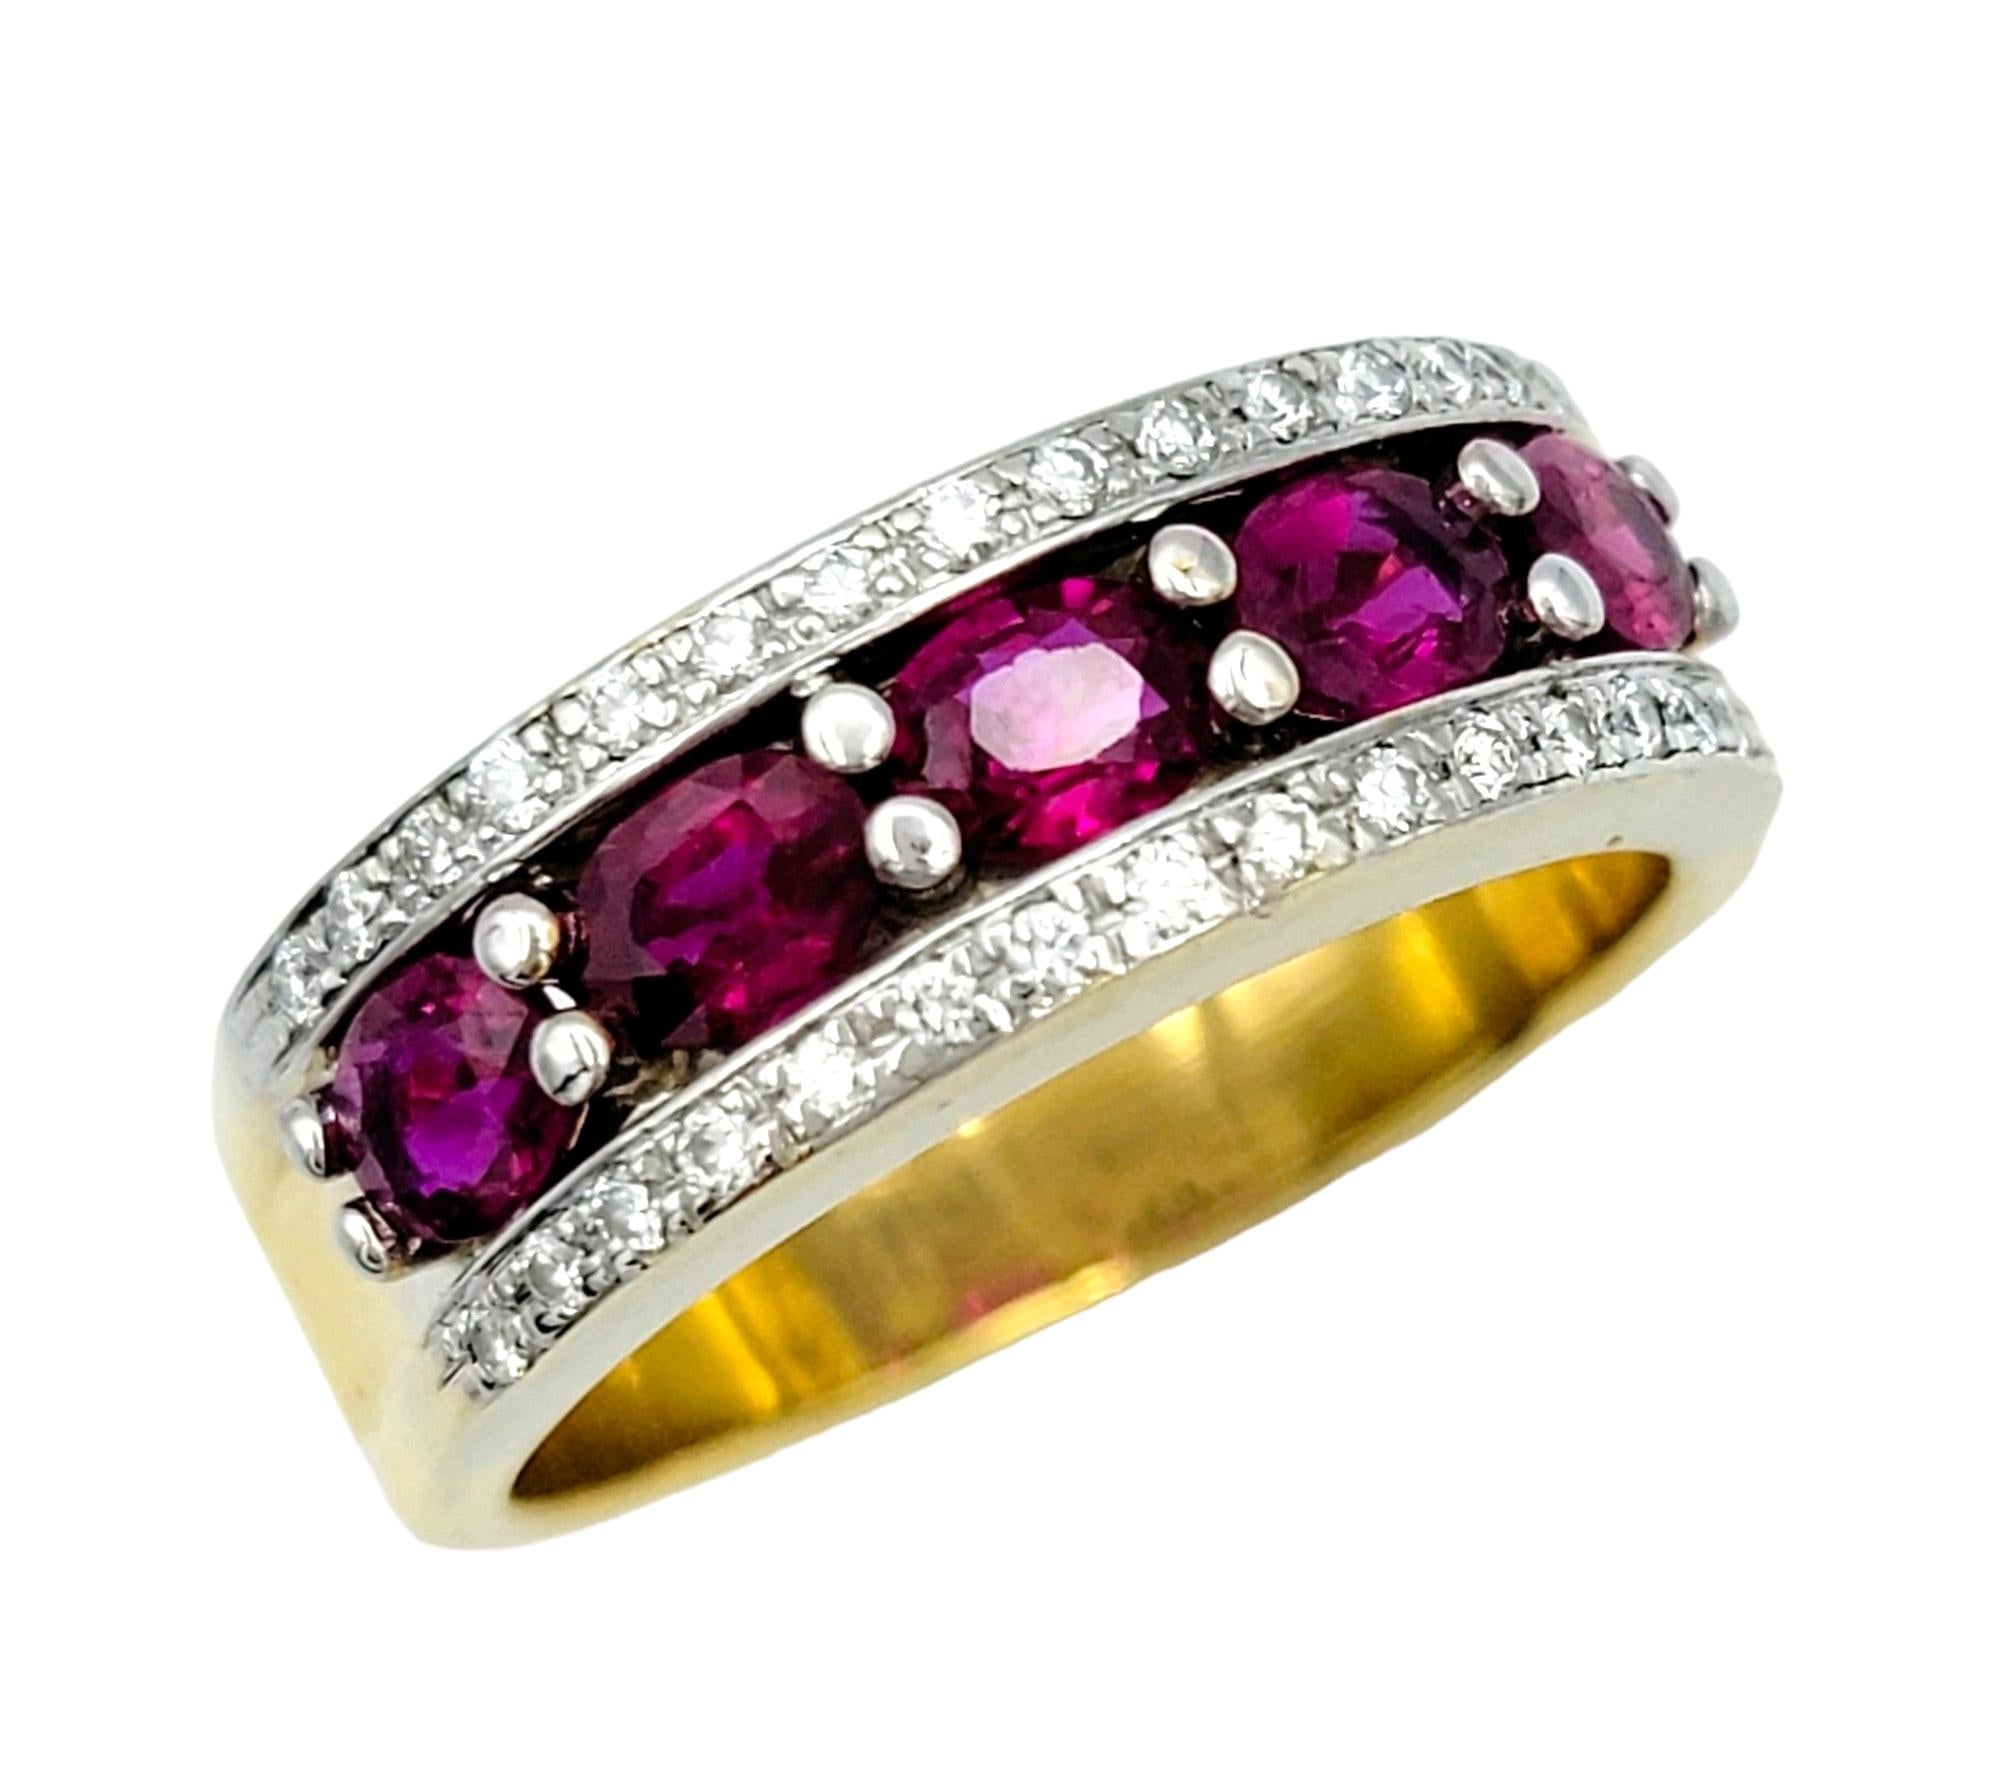 Ring size: 8.5

Elevate your jewelry collection with our exquisite 5 stone oval cut ruby band ring, a timeless symbol of beauty and sophistication. Crafted in a polished 18 karat yellow gold setting, this ring exudes warmth and luxury, creating a